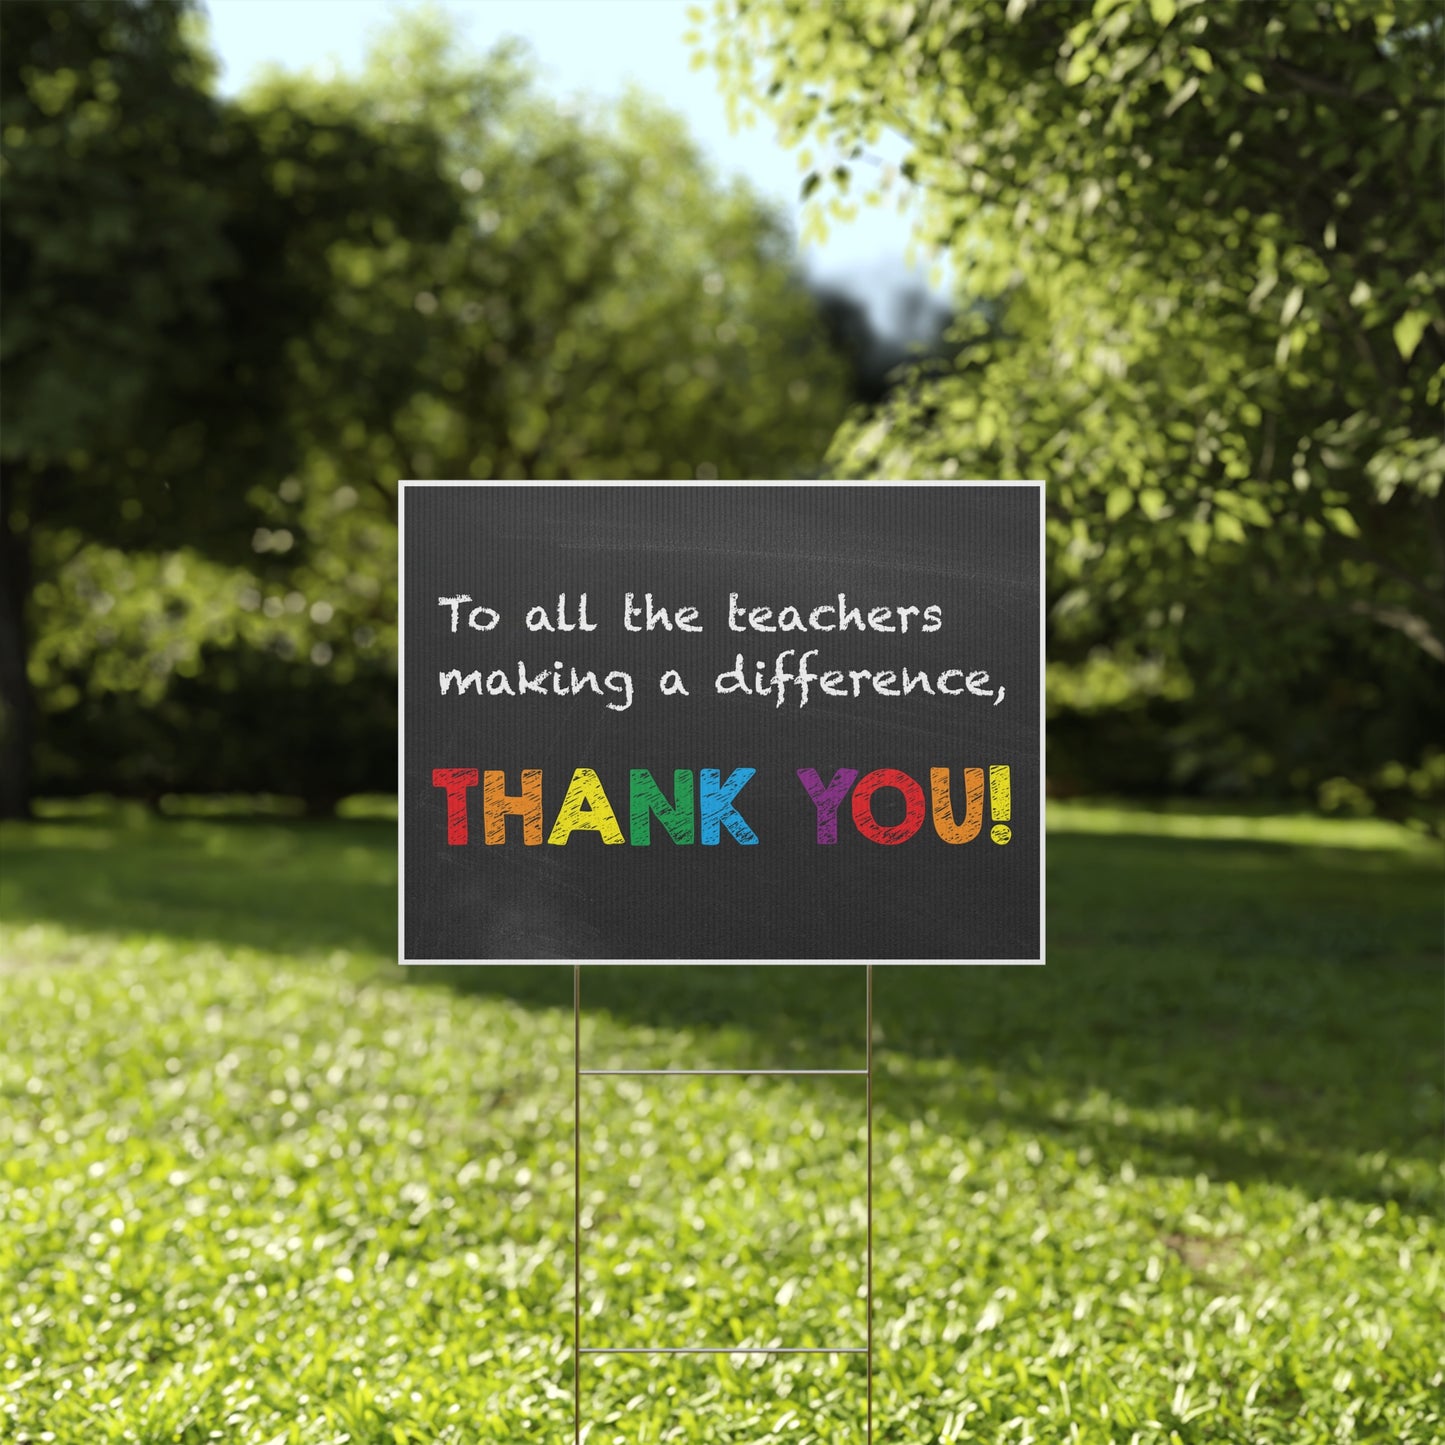 Thank You Teachers, Making a Difference, Yard Sign, Printed 2-Sided -18 x 12,24x18 or 36x24, Metal H-Stake Included, v2